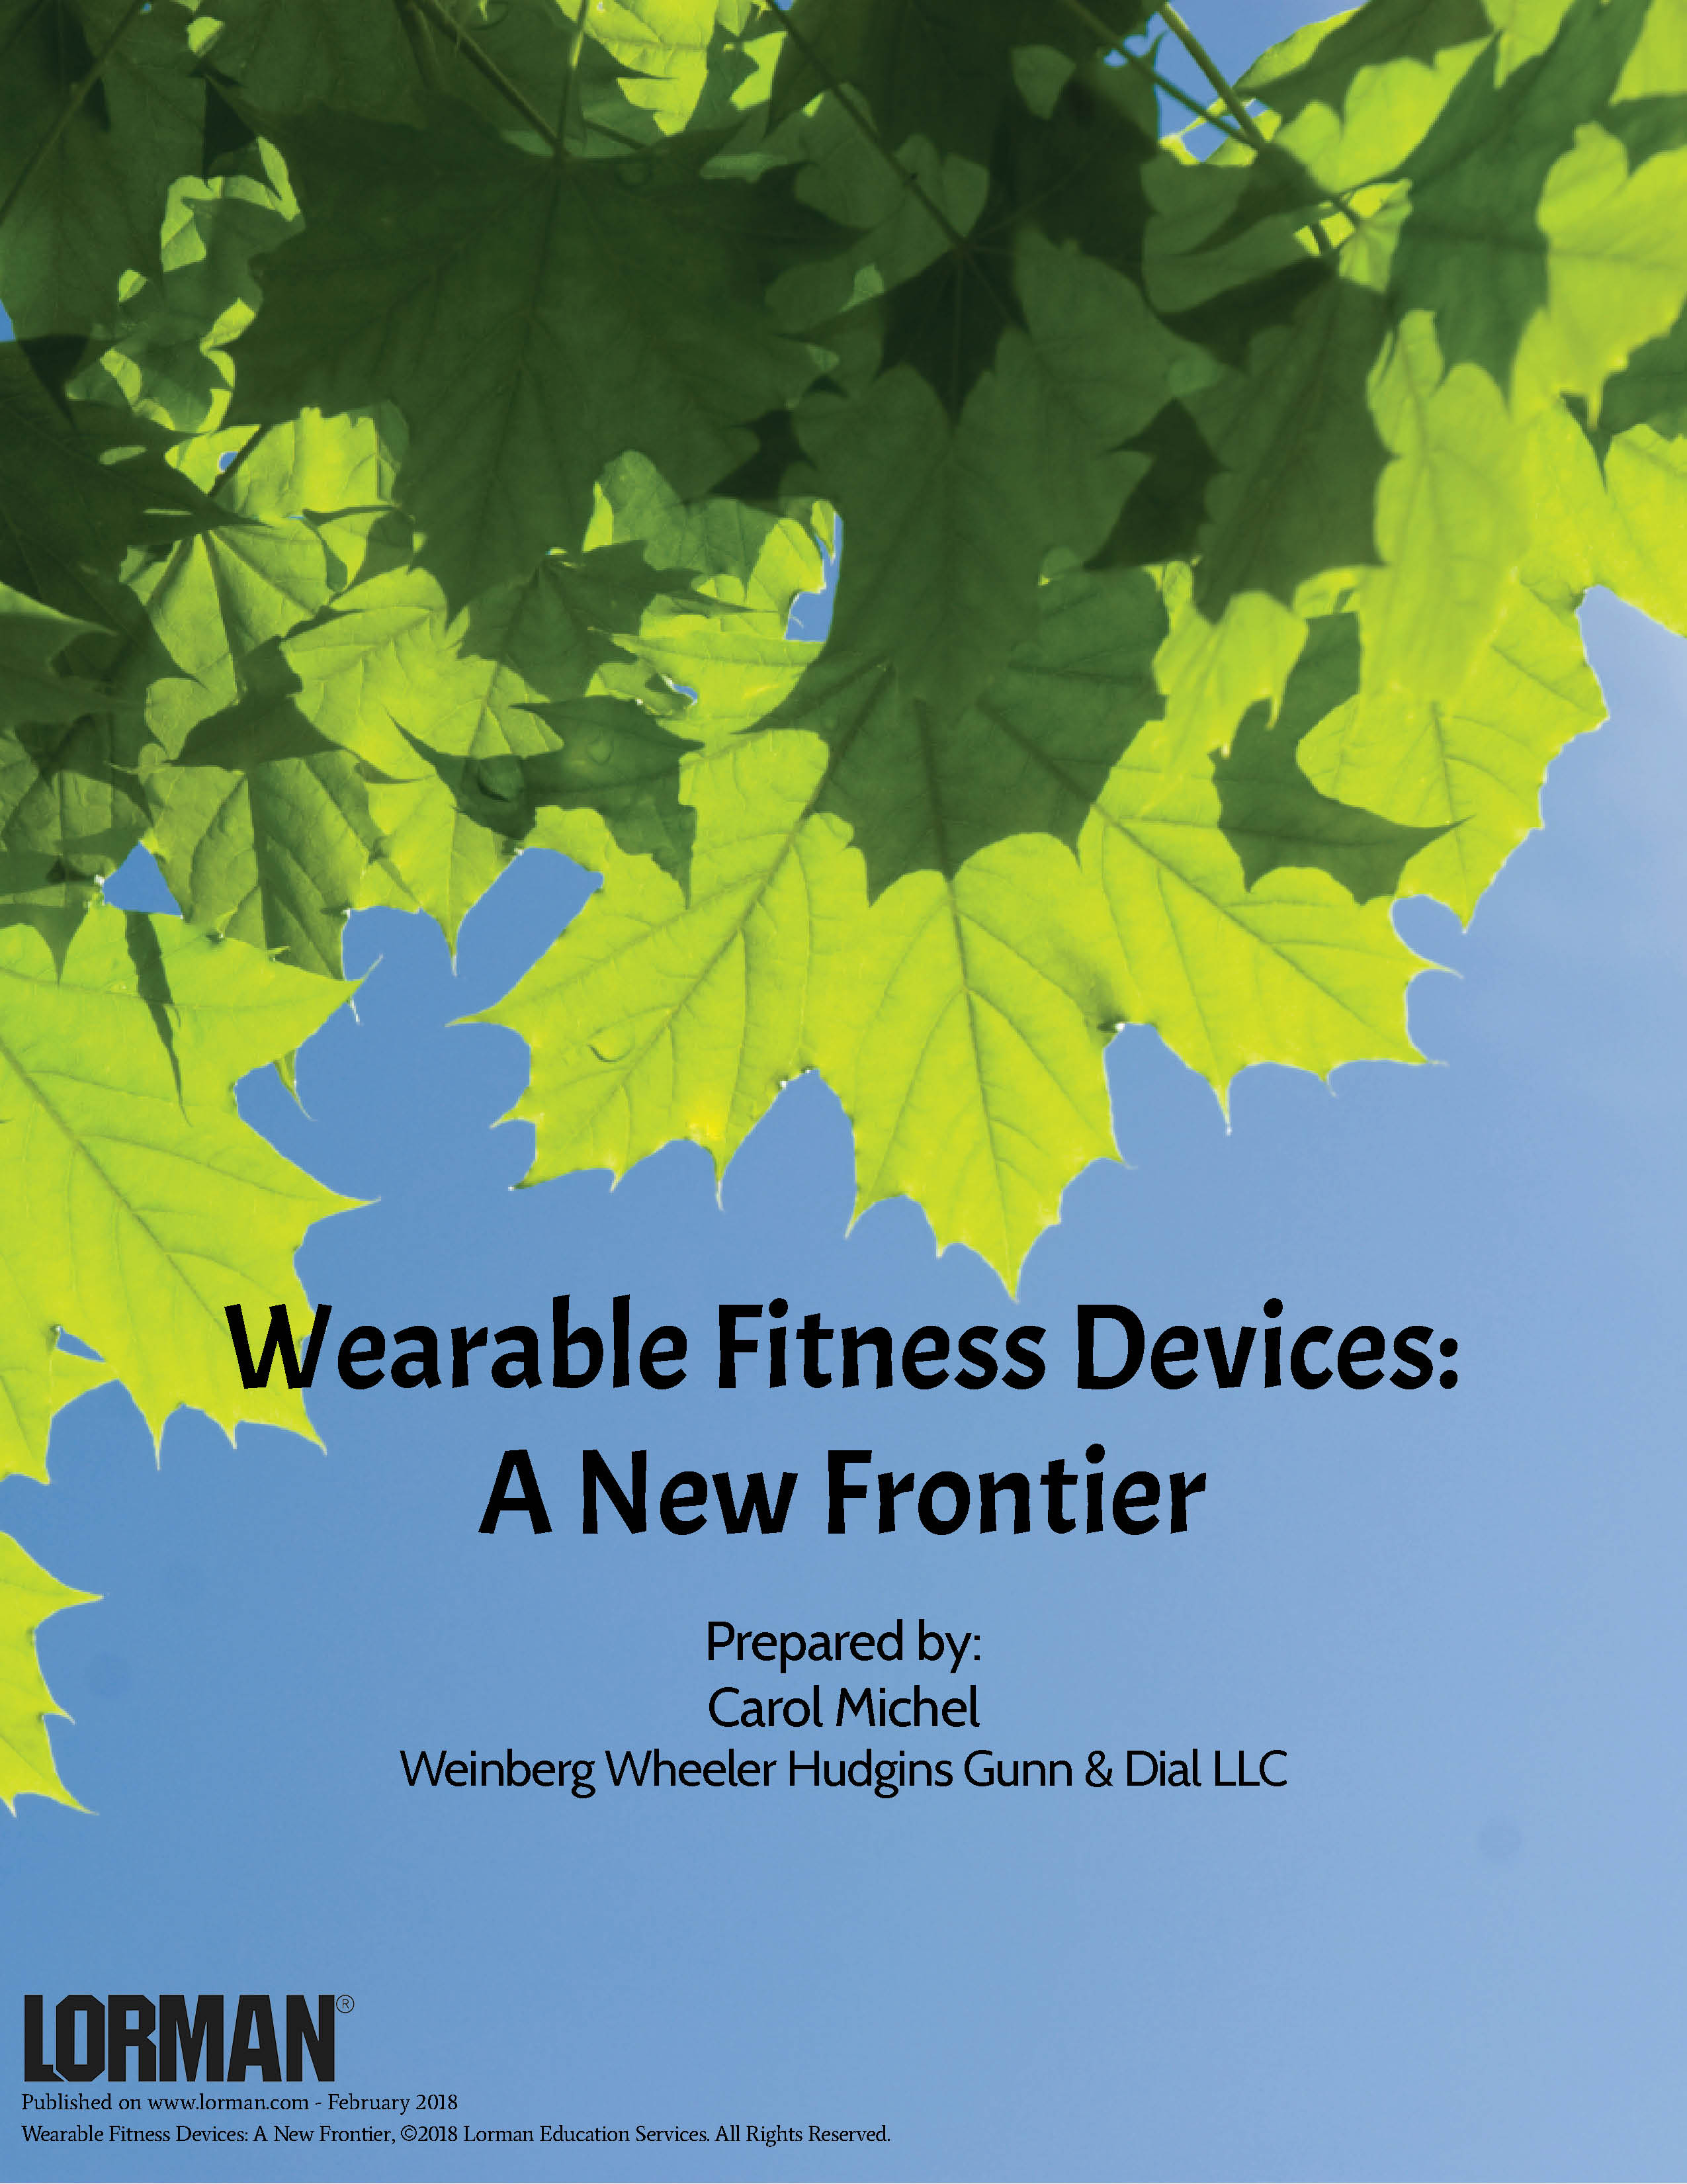 Wearable Fitness Devices: A New Frontier